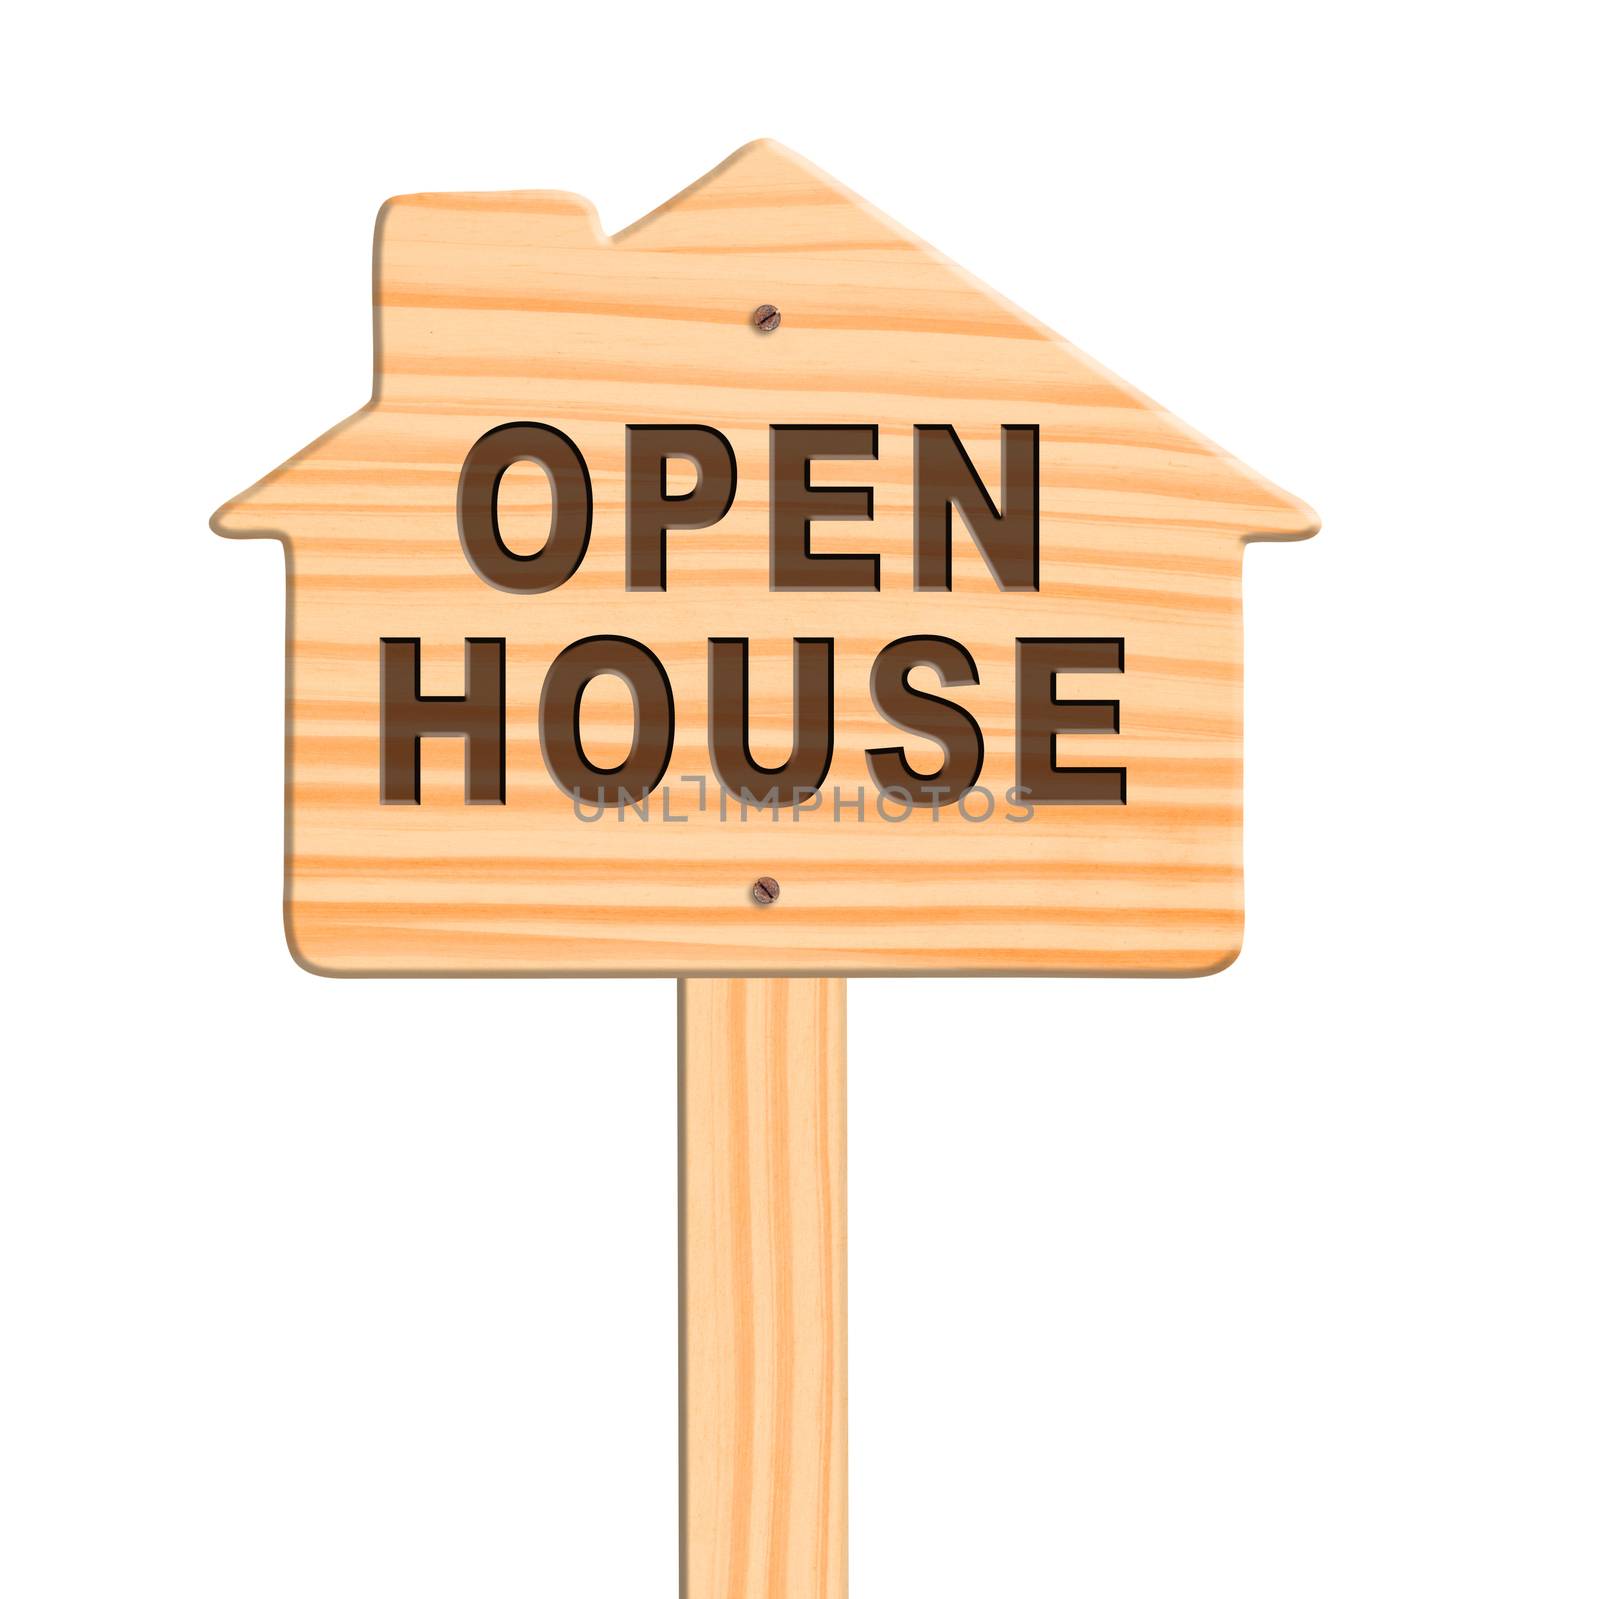 Open house sign isolated in white background, clipping path.